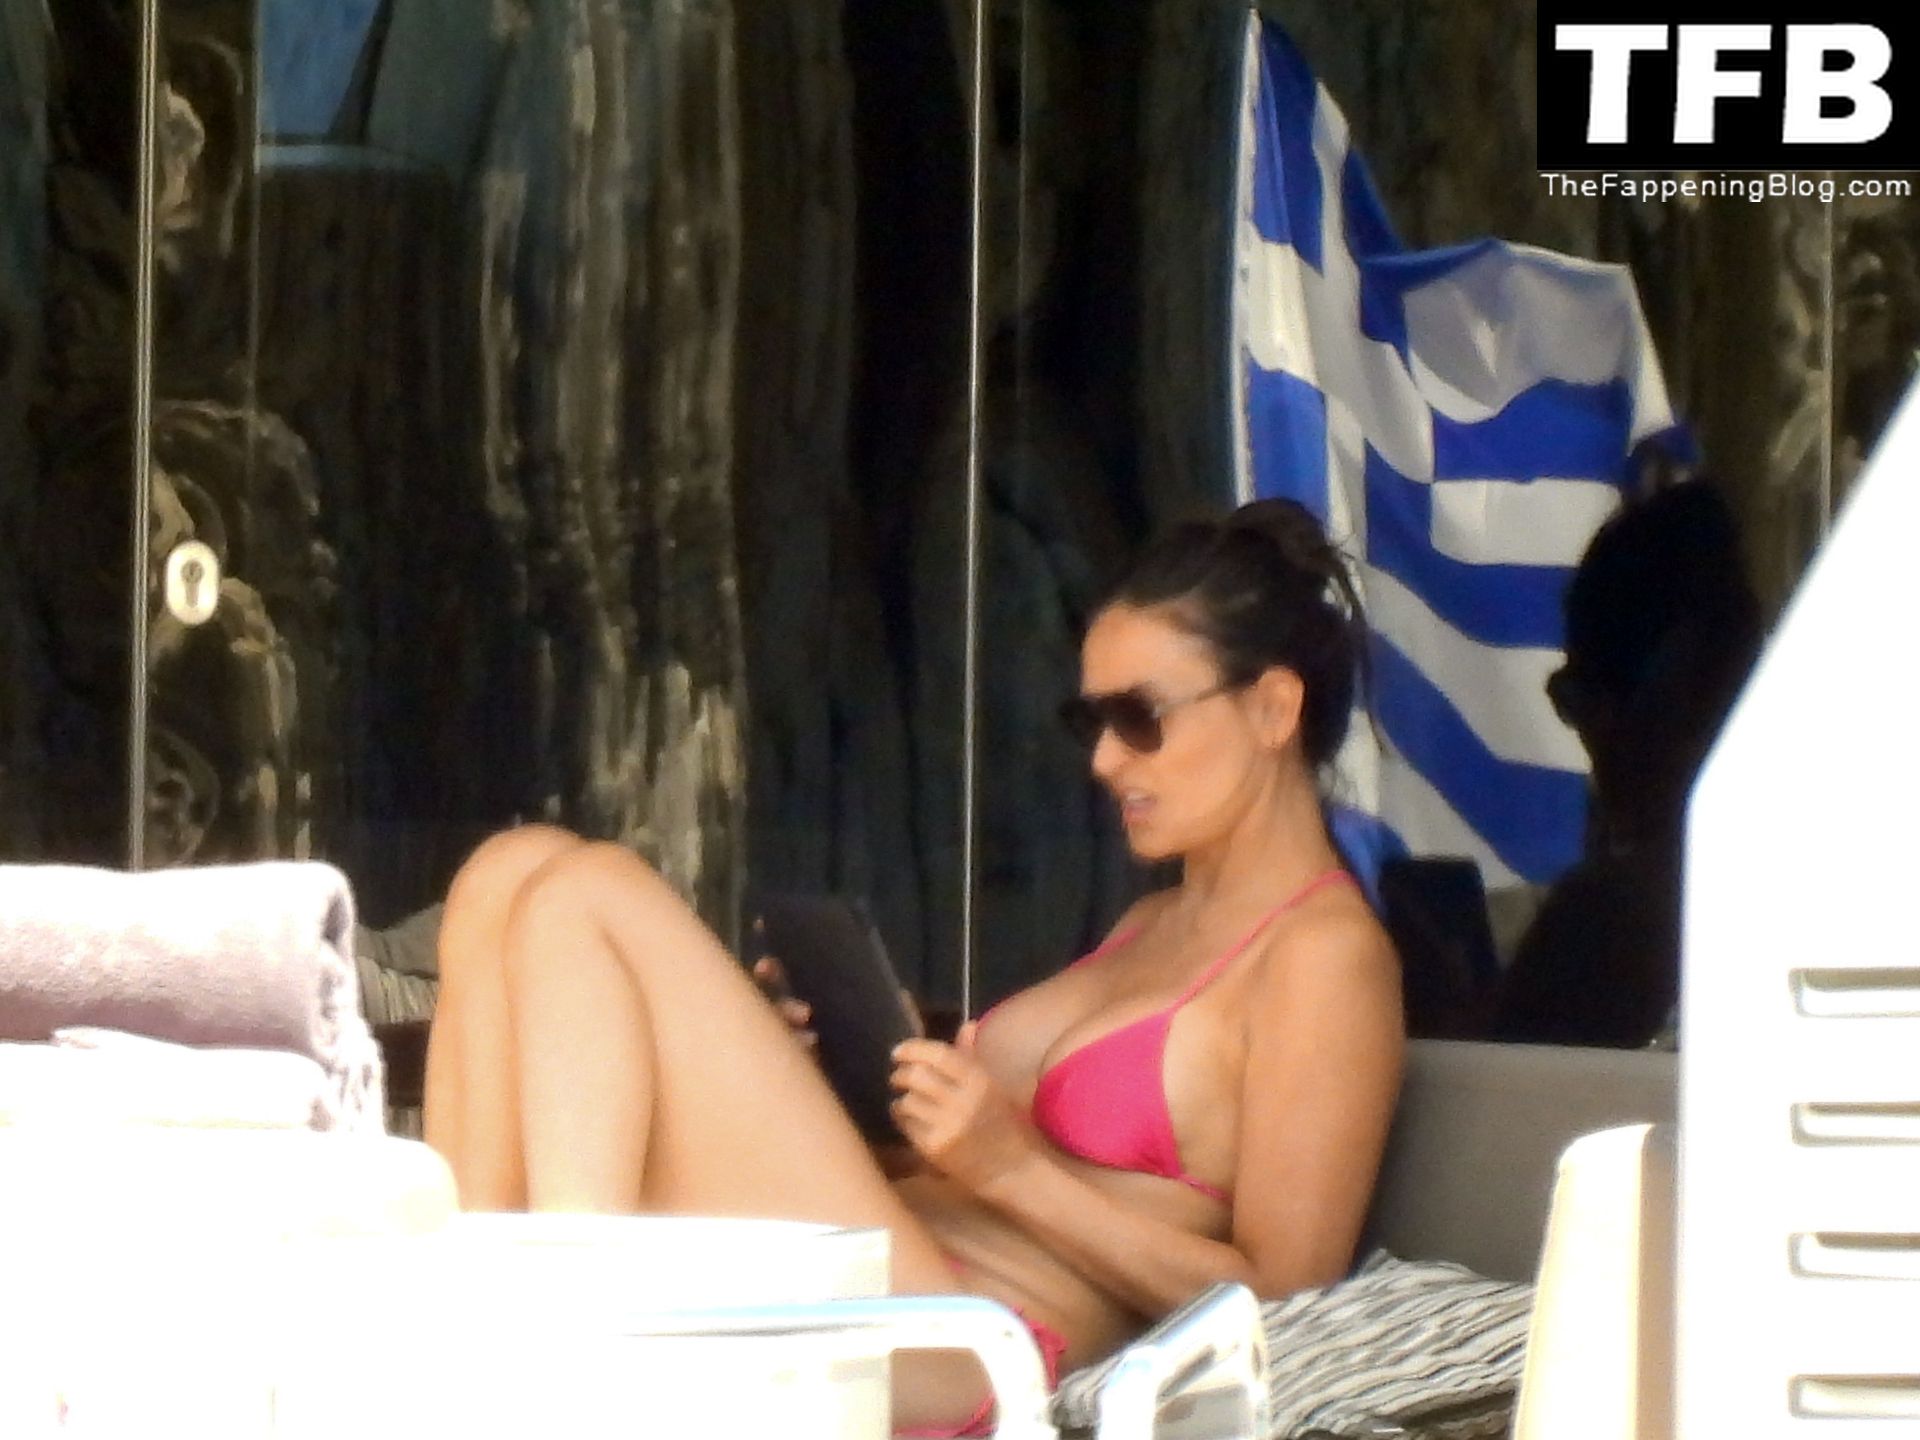 Demi Moore Sexy The Fappening Blog 40 - Demi Moore Looks Sensational at 59 in a Red Bikini on Vacation in Greece (59 Photos)